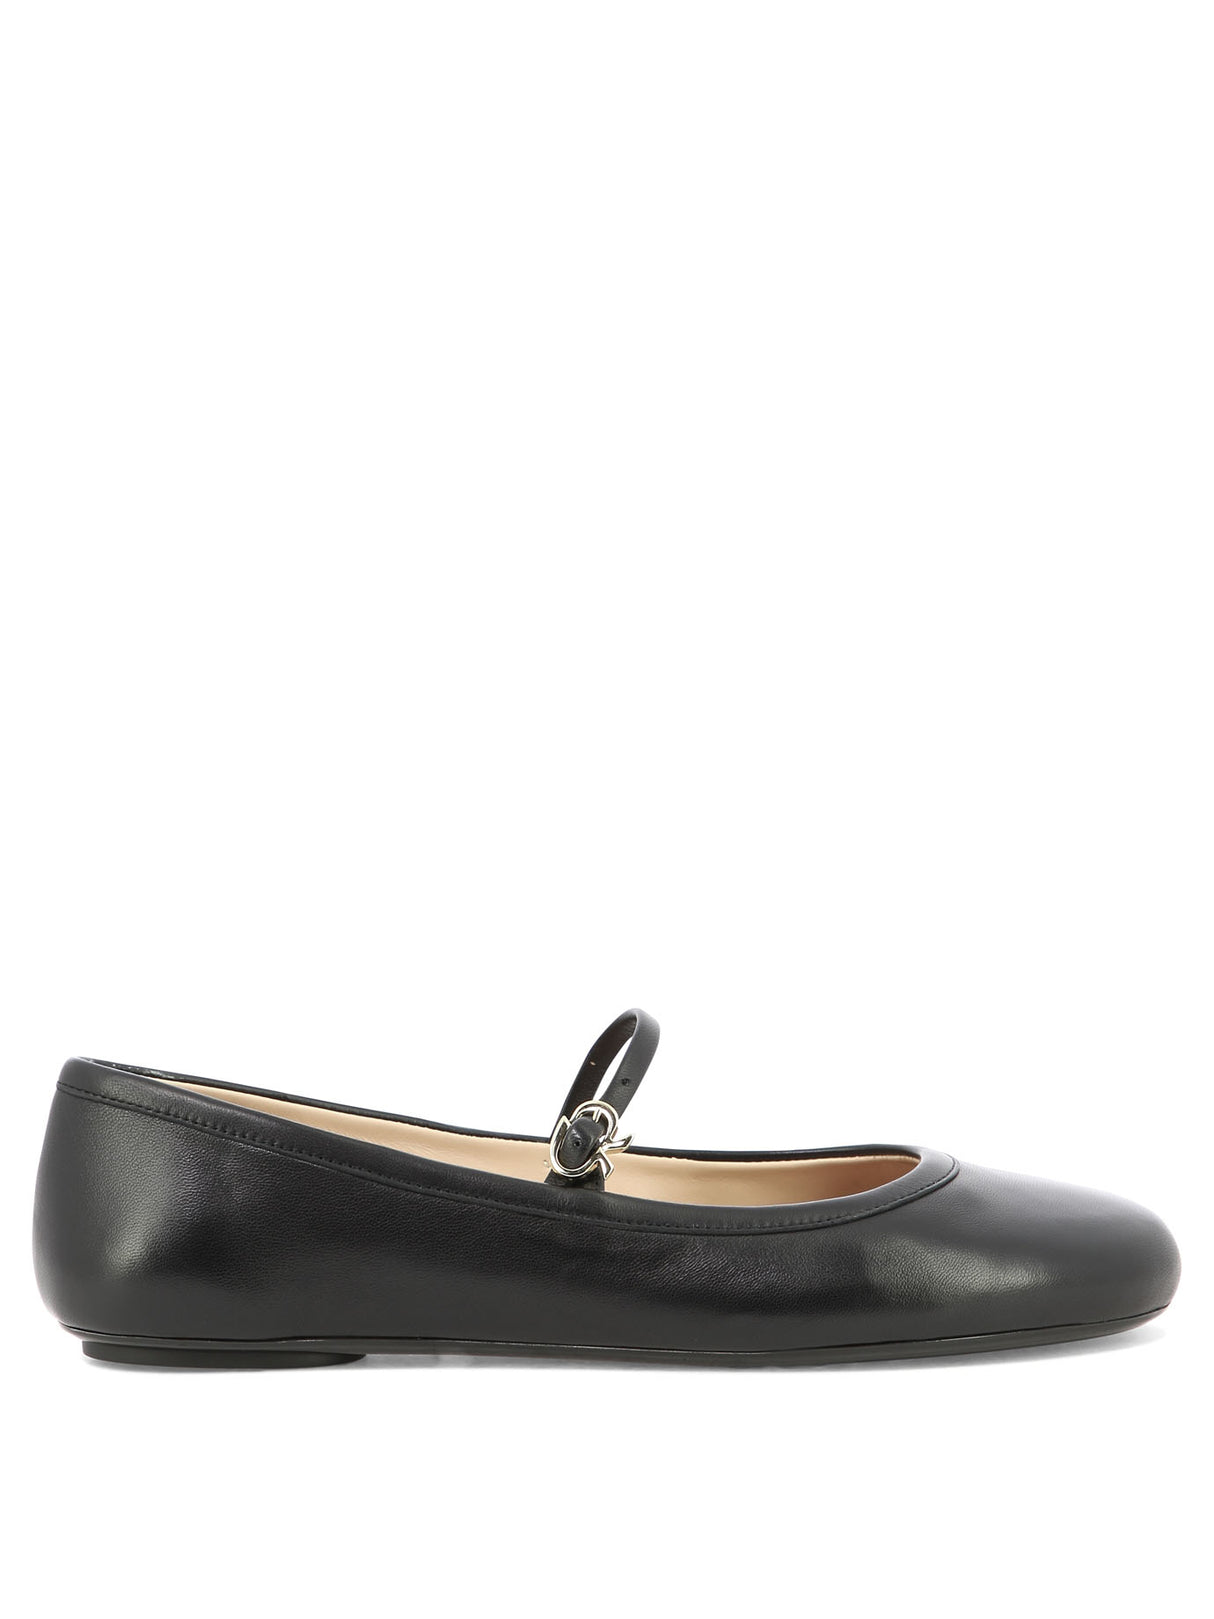 GIANVITO ROSSI Classic Black Ballet Flats for Women - FW24 Collection